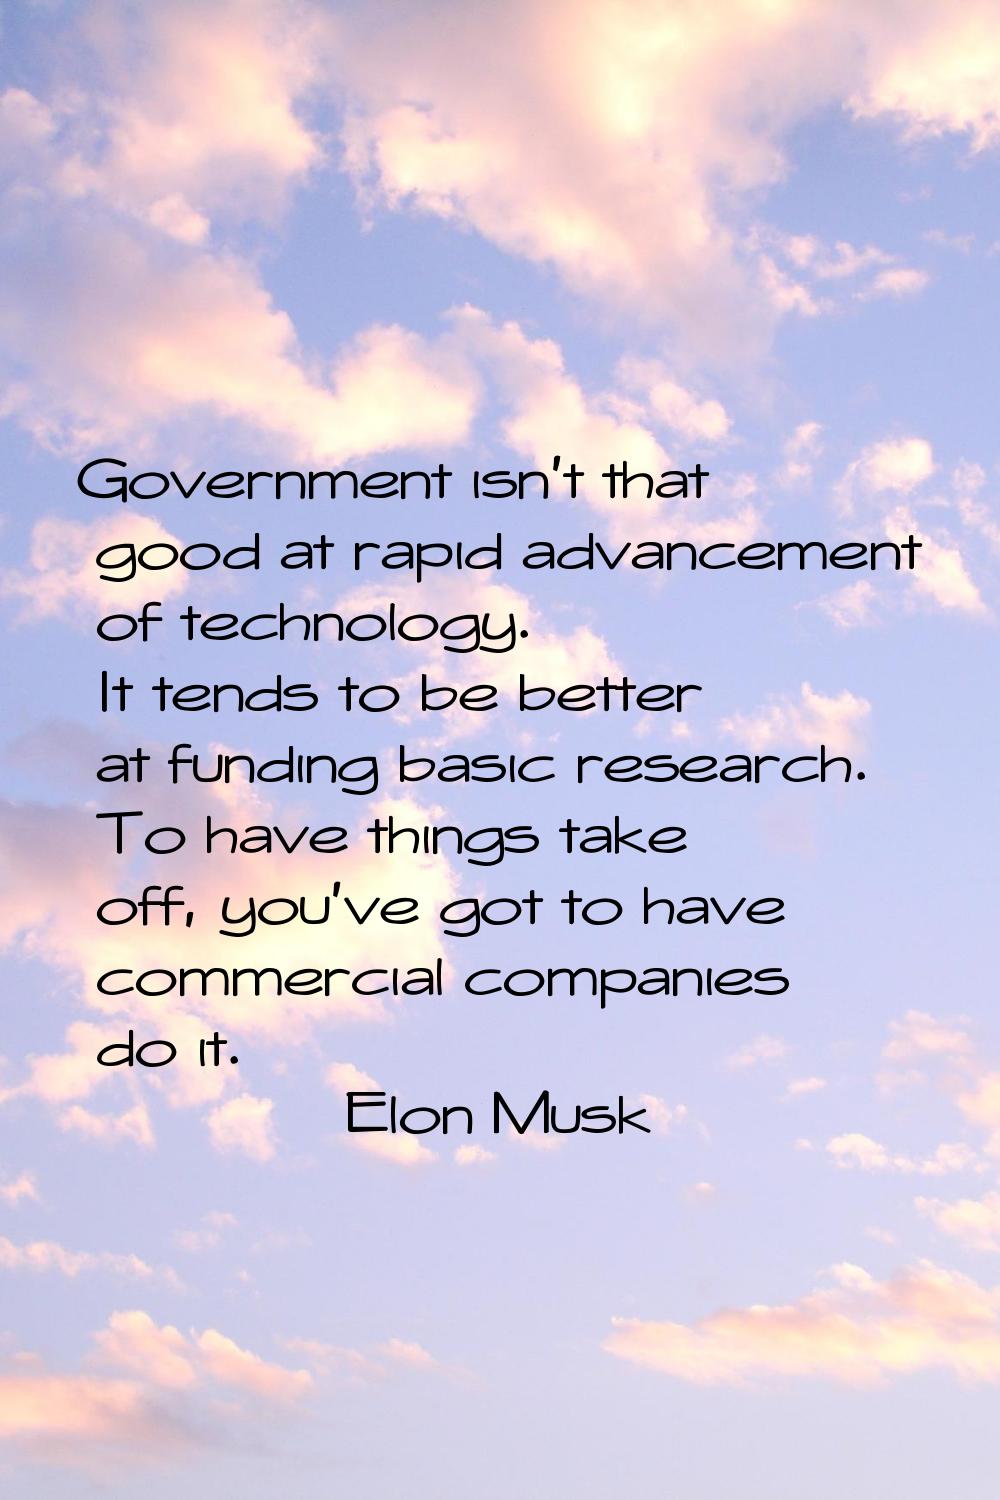 Government isn't that good at rapid advancement of technology. It tends to be better at funding bas